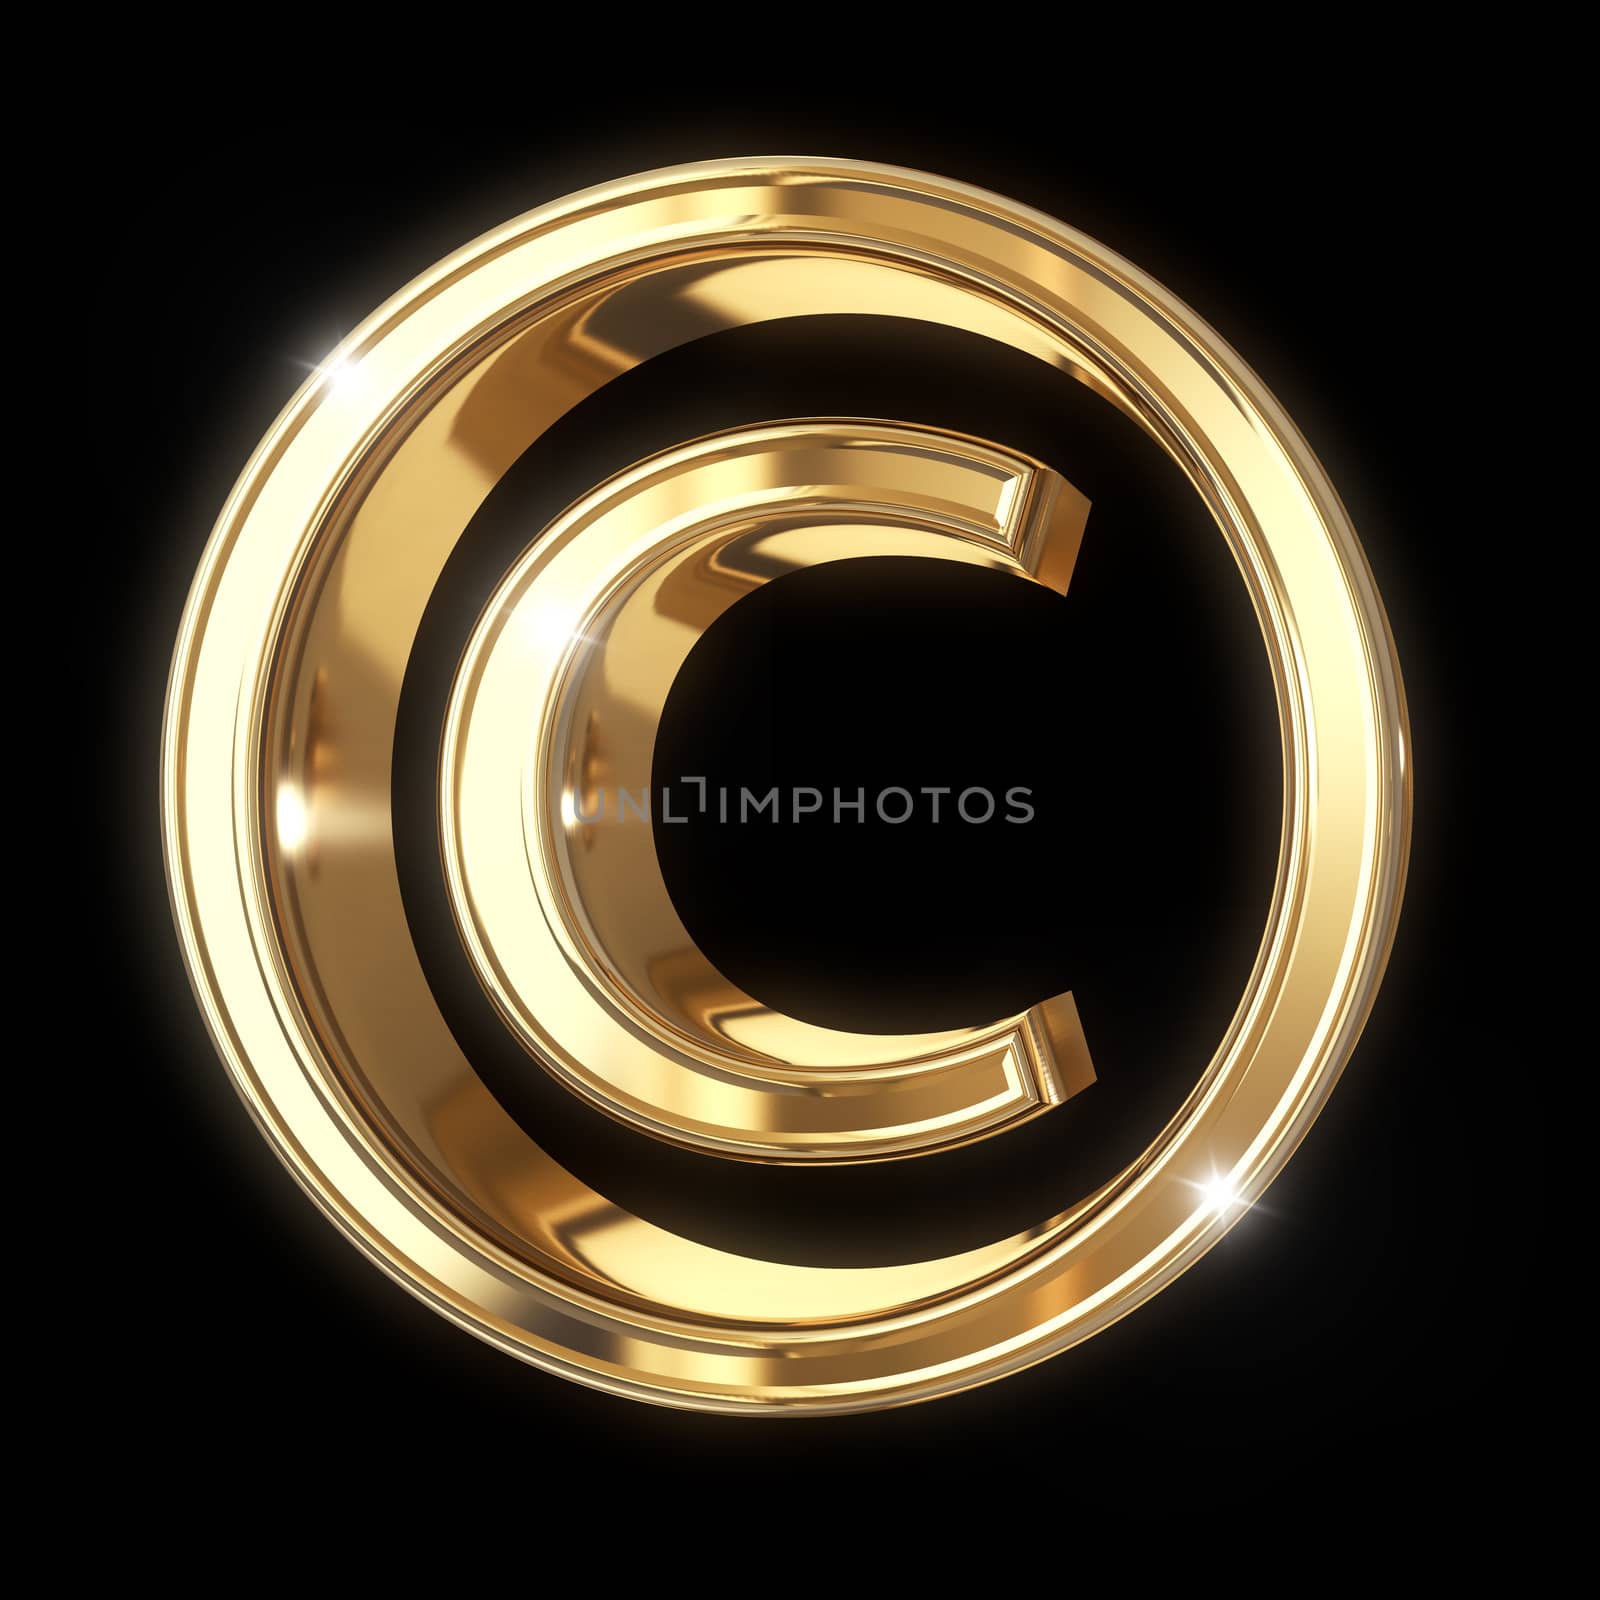 Golden 3D copyright symbol with clipping path - isolated on black background